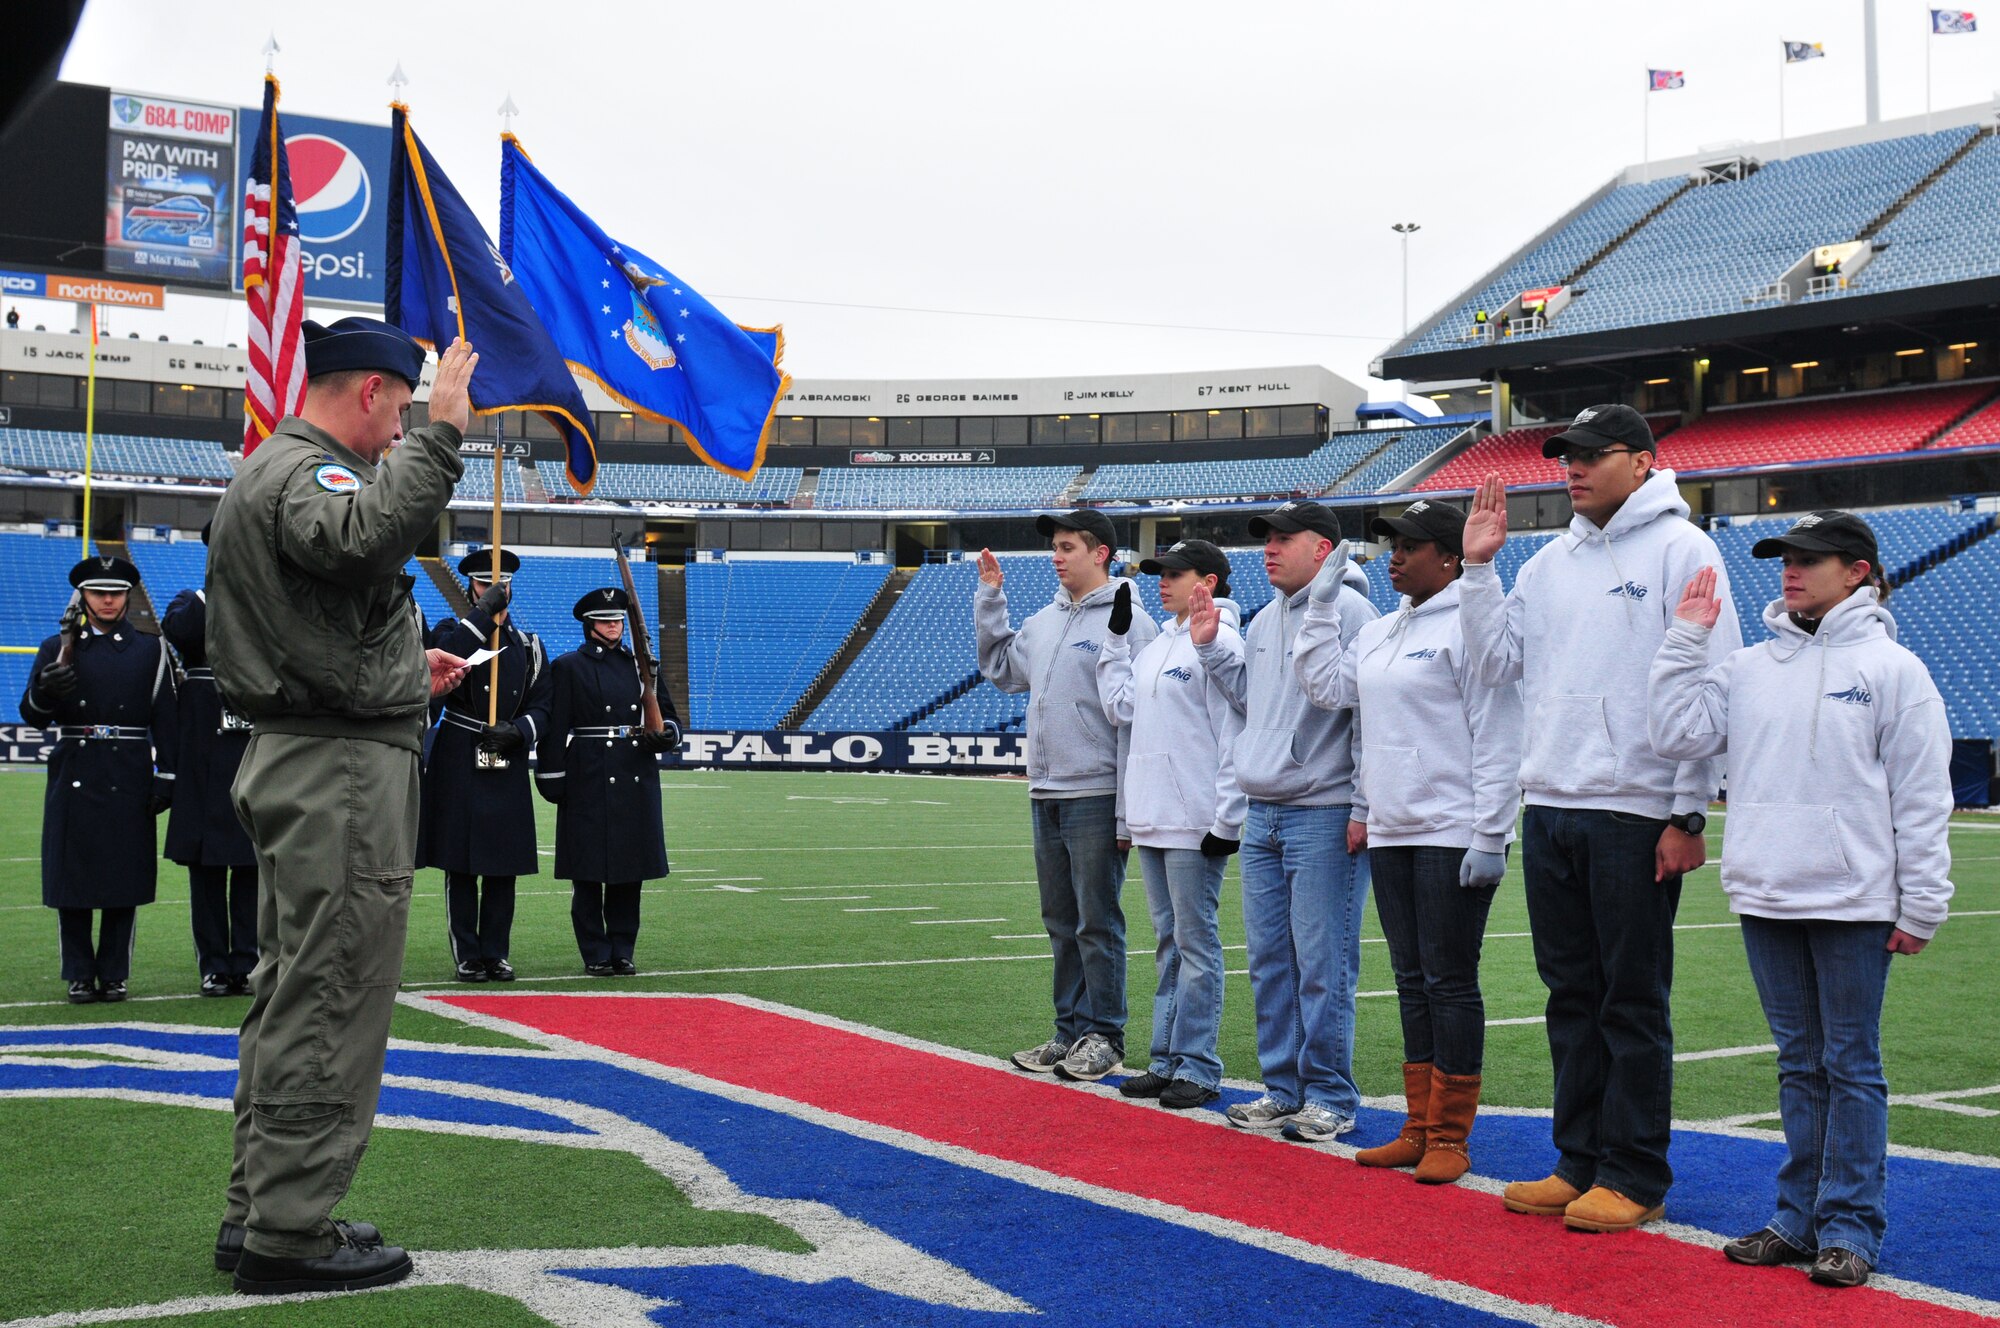 During a Buffalo Bills pregame ceremony held Sunday morning, six of the newest members of the New York Air National Guard's 107th Airlift Wing took the Oath of Enlistment. The ceremony was played during halftime on the Jumbotron for the fans to see.  Lt. Col. James Hoch swears in from left to right Airmen 1st class Daniel Tremblett, Cara Sturdivant, Keith McArthur, Christina Swanson, Joshua Velez and Joanna Vail. (U.S. Air Force photo/Tech. Sgt. Justin Huett)  